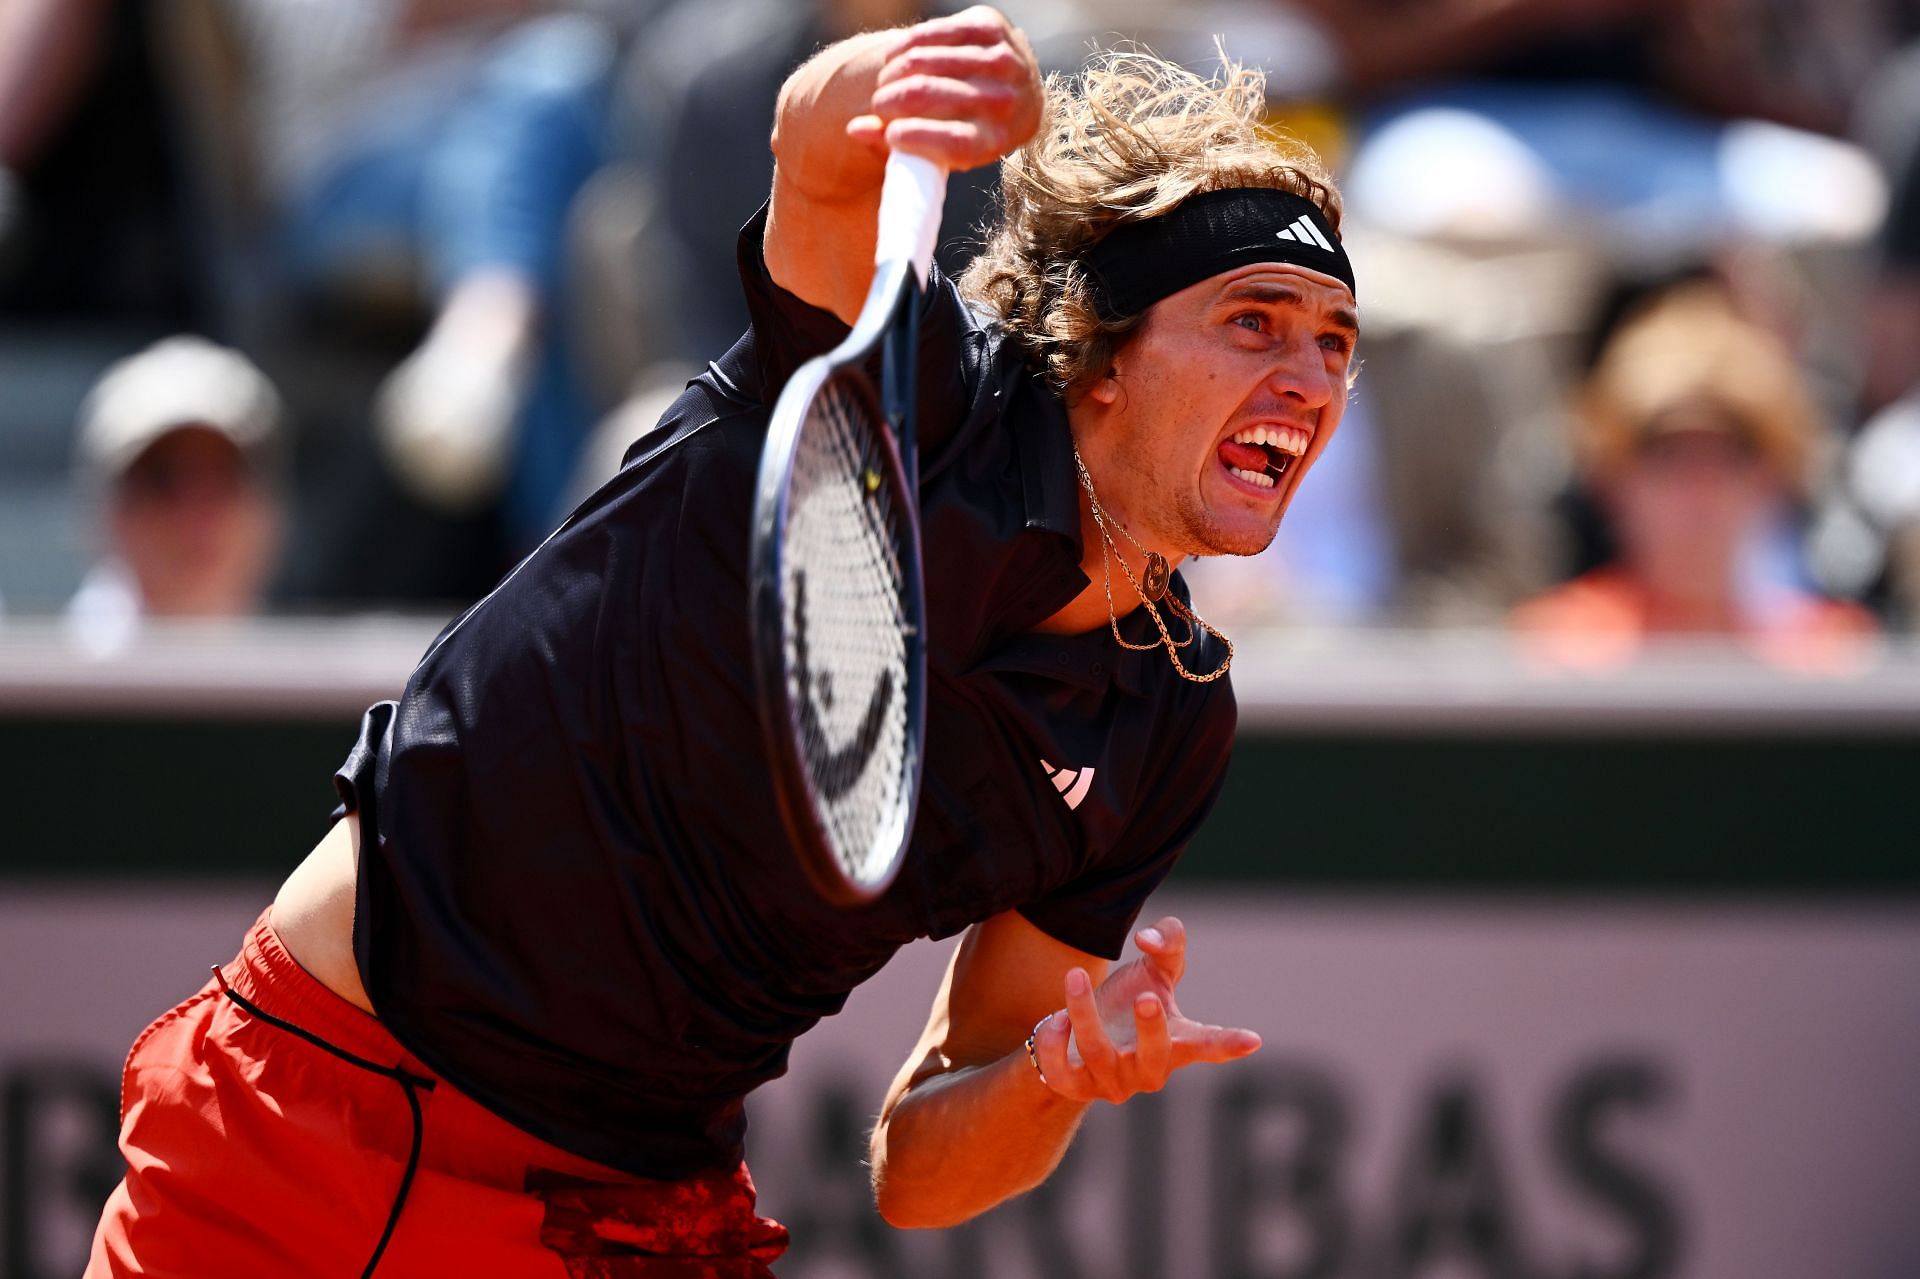 French Open 2023 Alexander Zverev vs Alex Molcan preview, head-to-head, prediction, odds, and pick Roland Garros